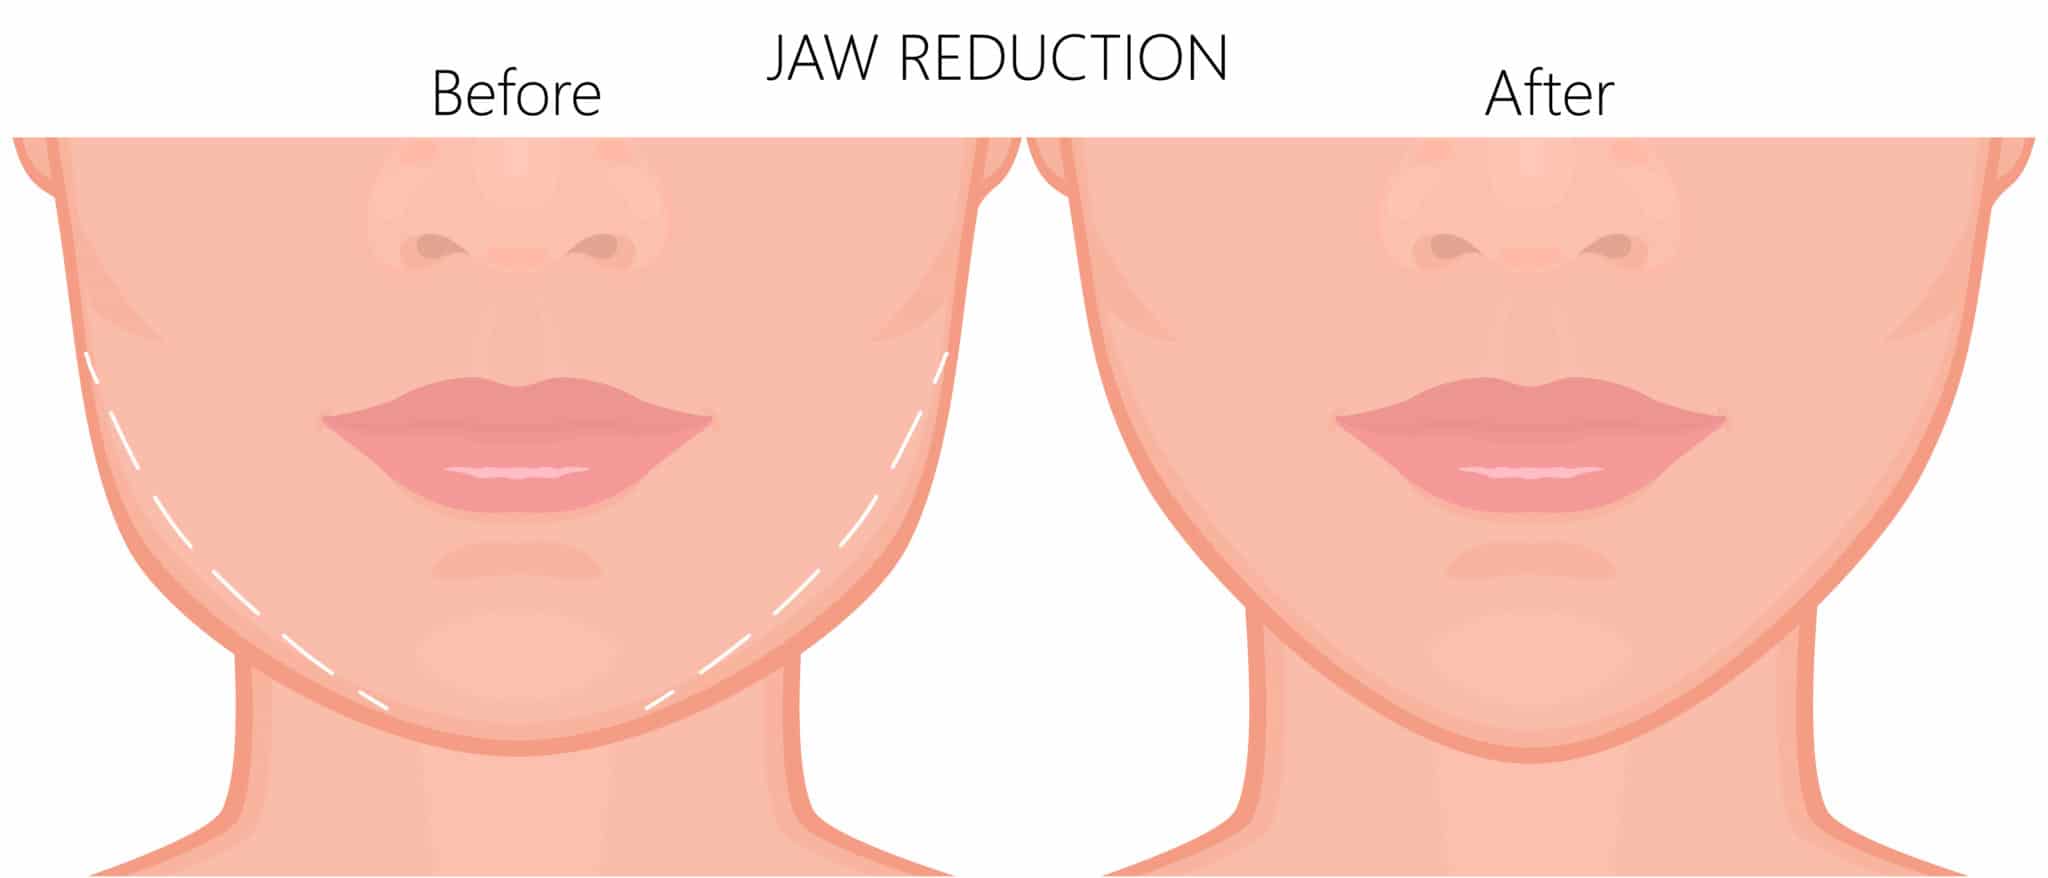 Occlusal equilibration can help balance teeth to treat tmj disorder